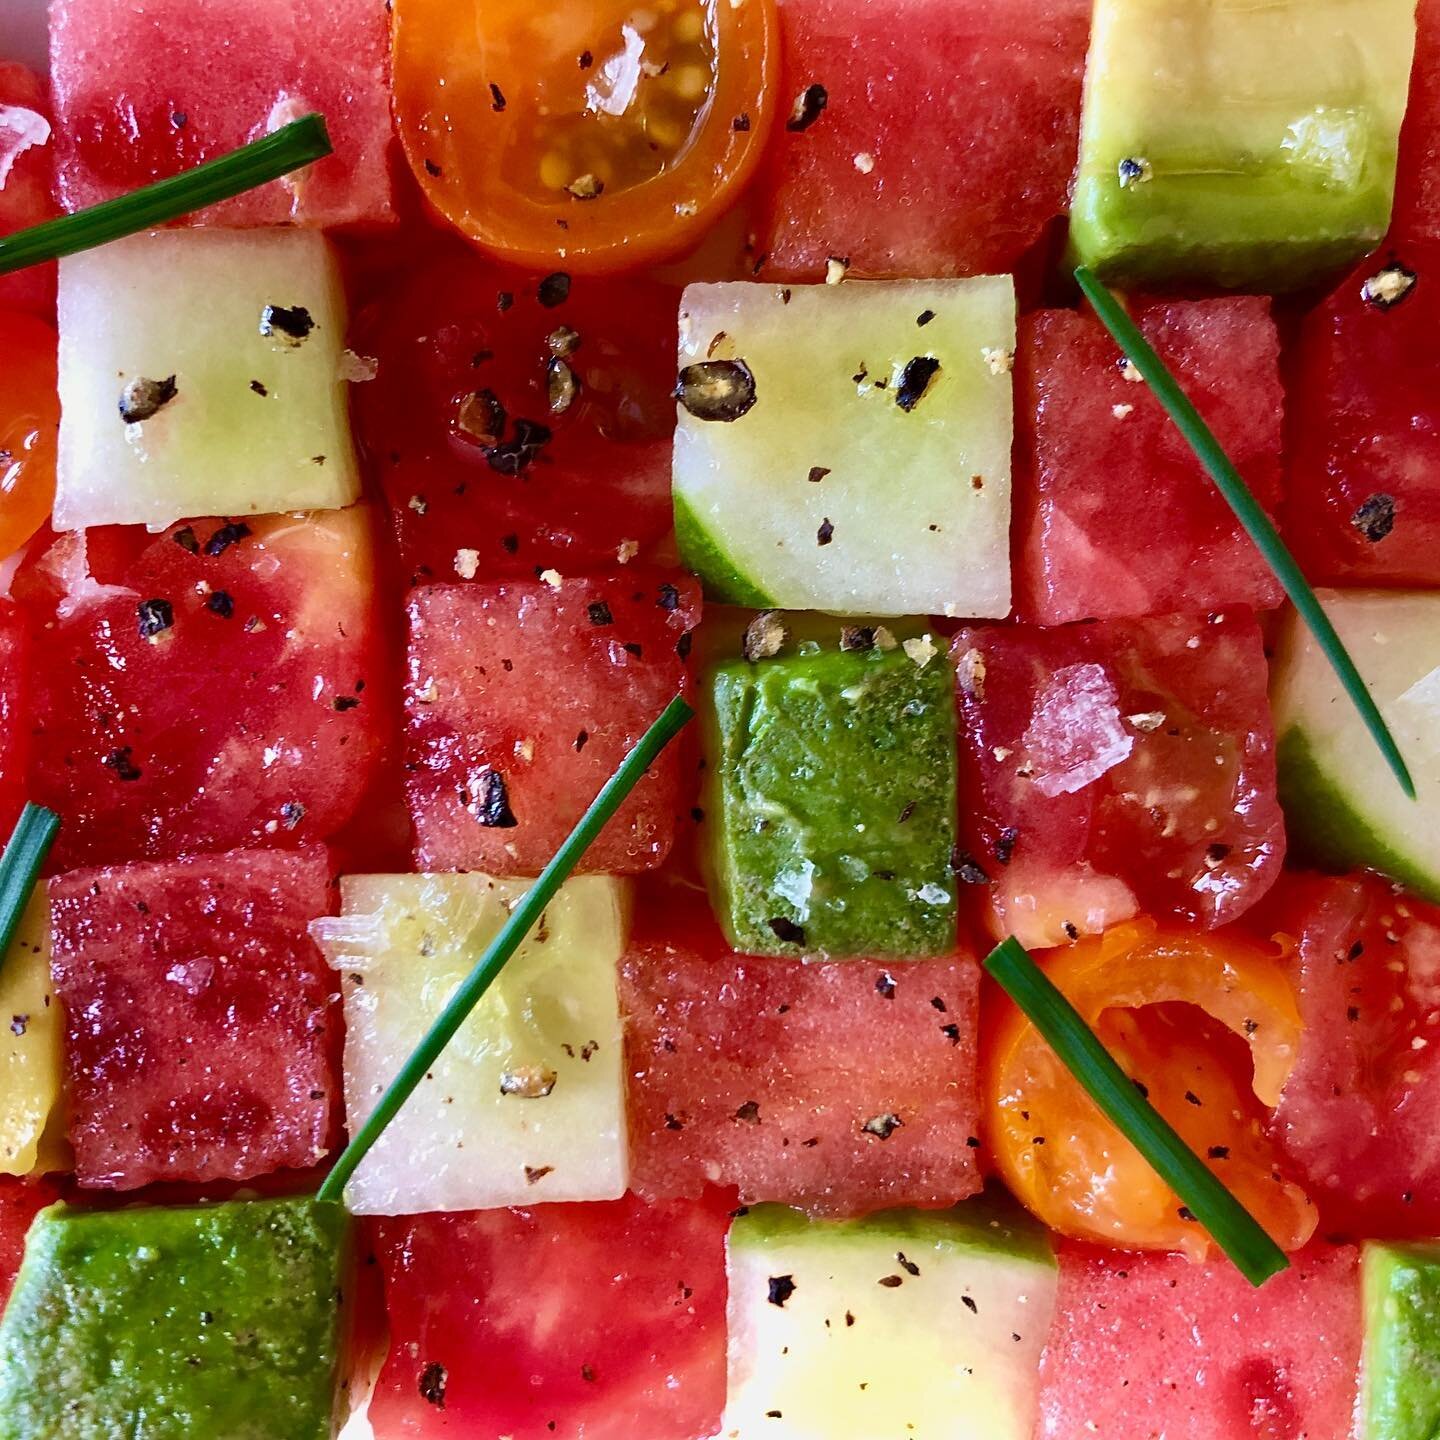 I finally found a sweet watermelon (grrr ... early season melons)! Today was made for this checkerboard of a watermelon, avocado, cucumber, and tomato salad by @geraldhirigoyen. Recipe over at @epicurious. 🍉🍉🍉